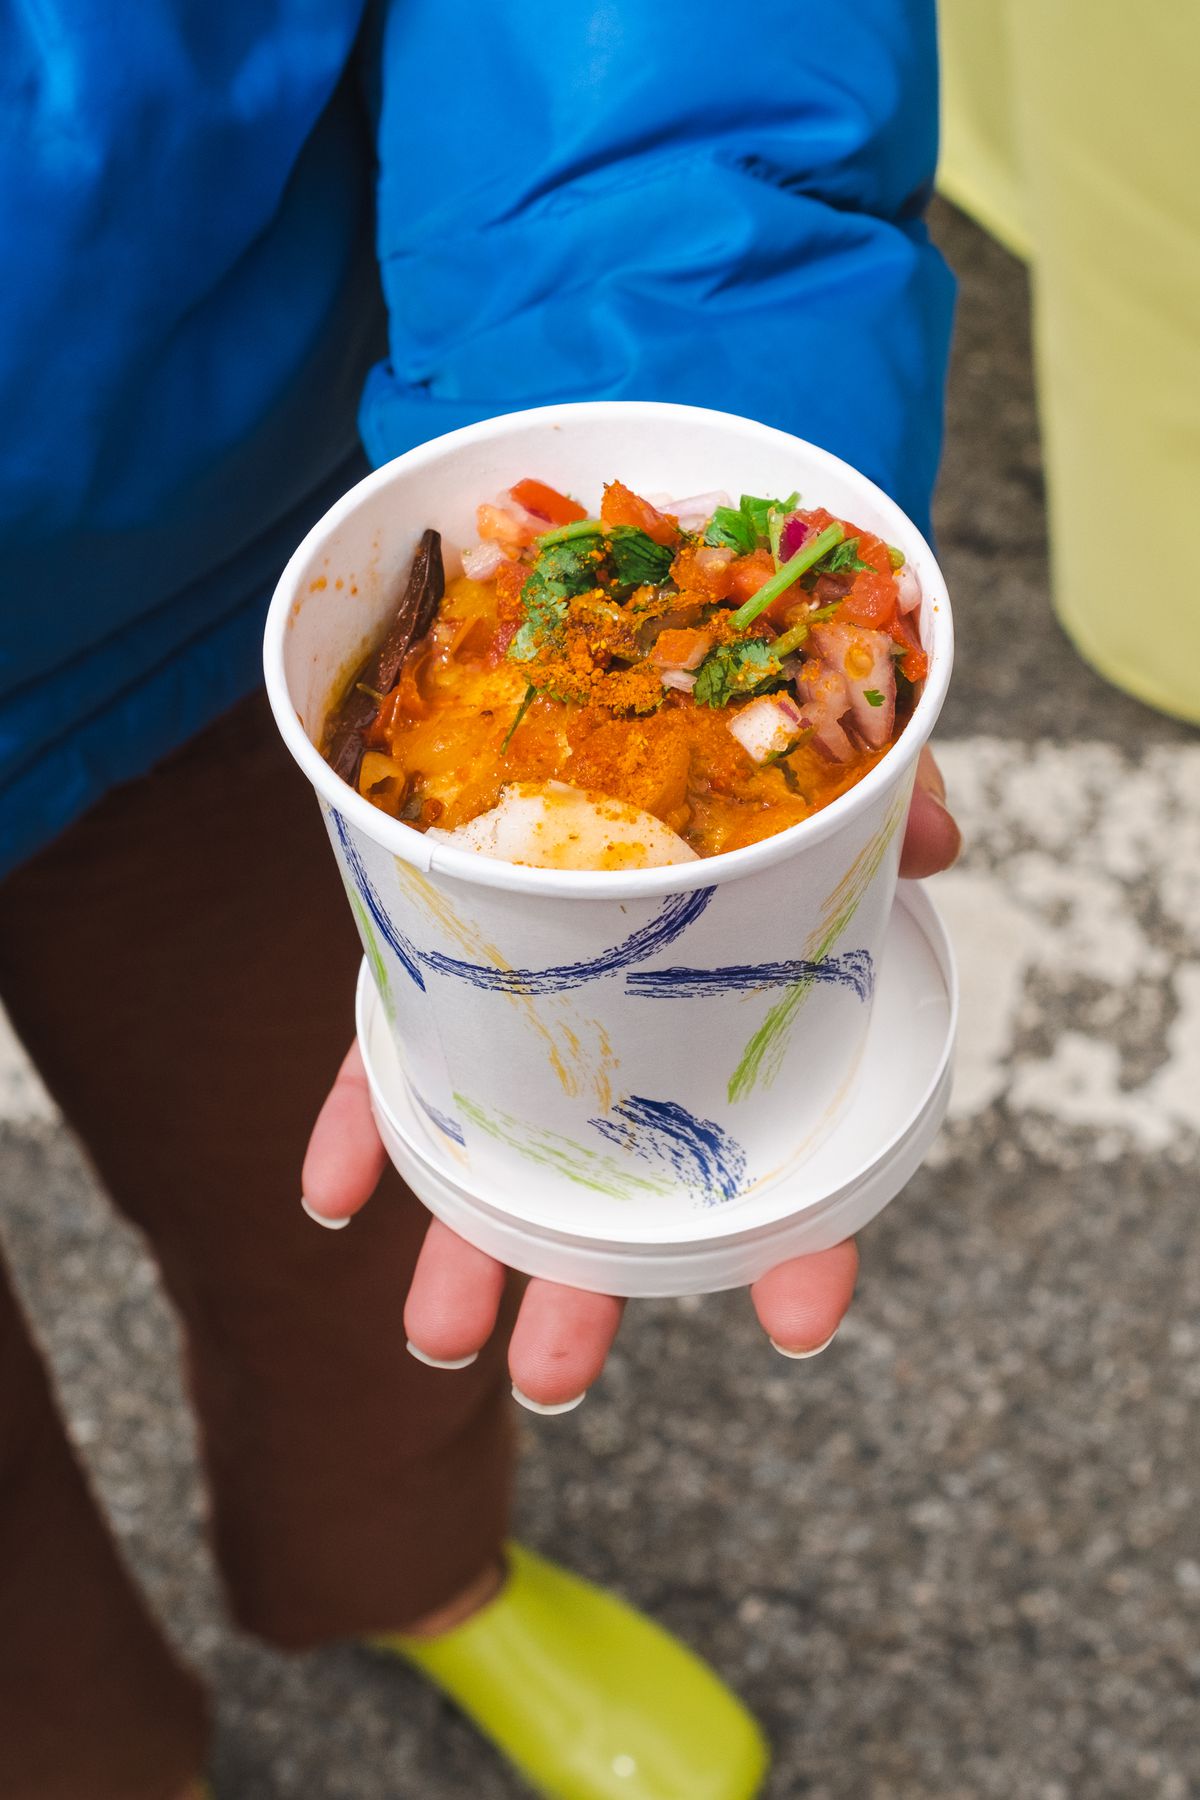 A hand holds a lentil dish in a container.